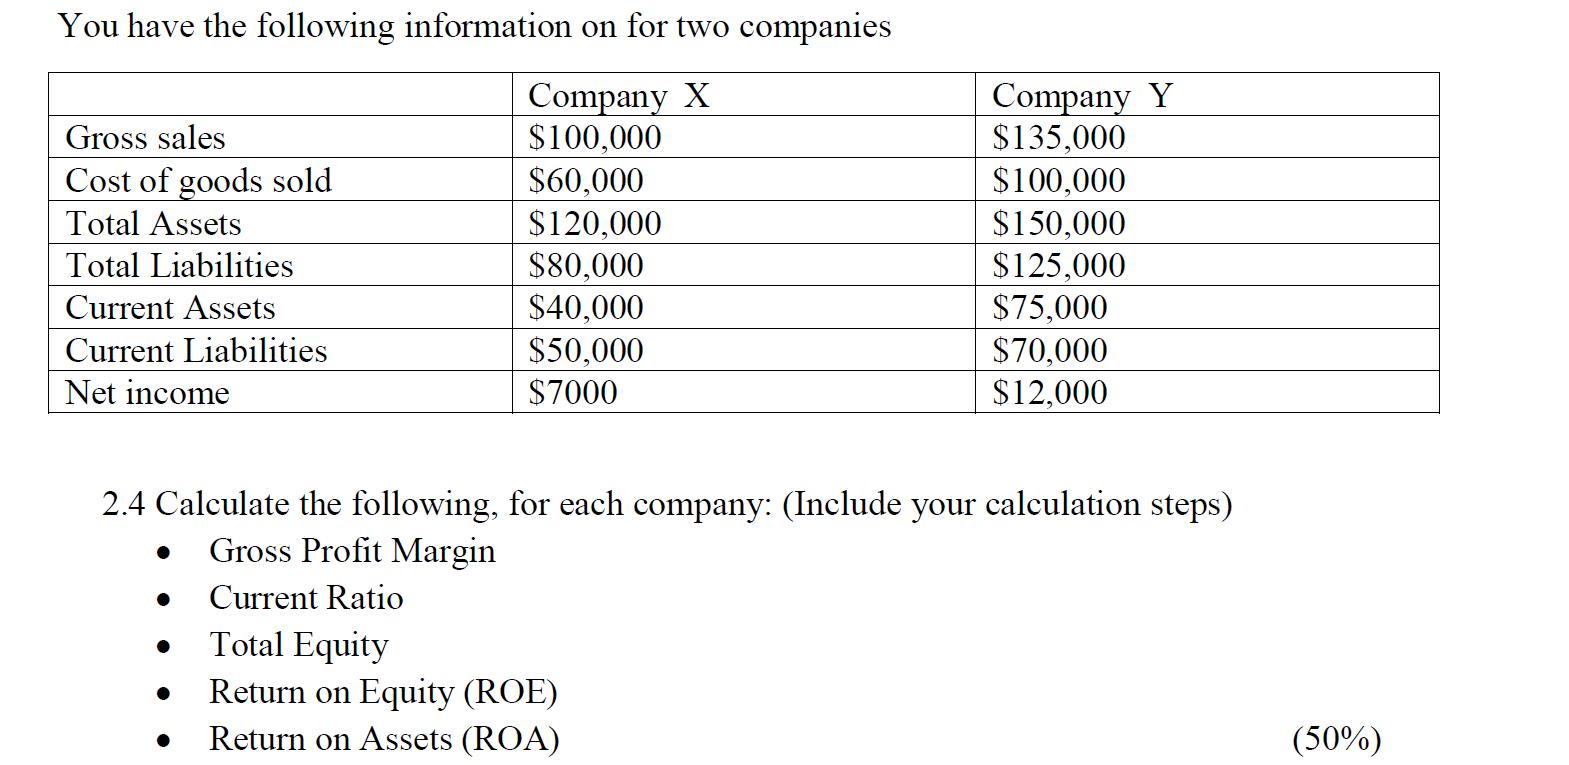 You have the following information on for two companies 2.4 Calculate the following, for each company: (Include your calculat